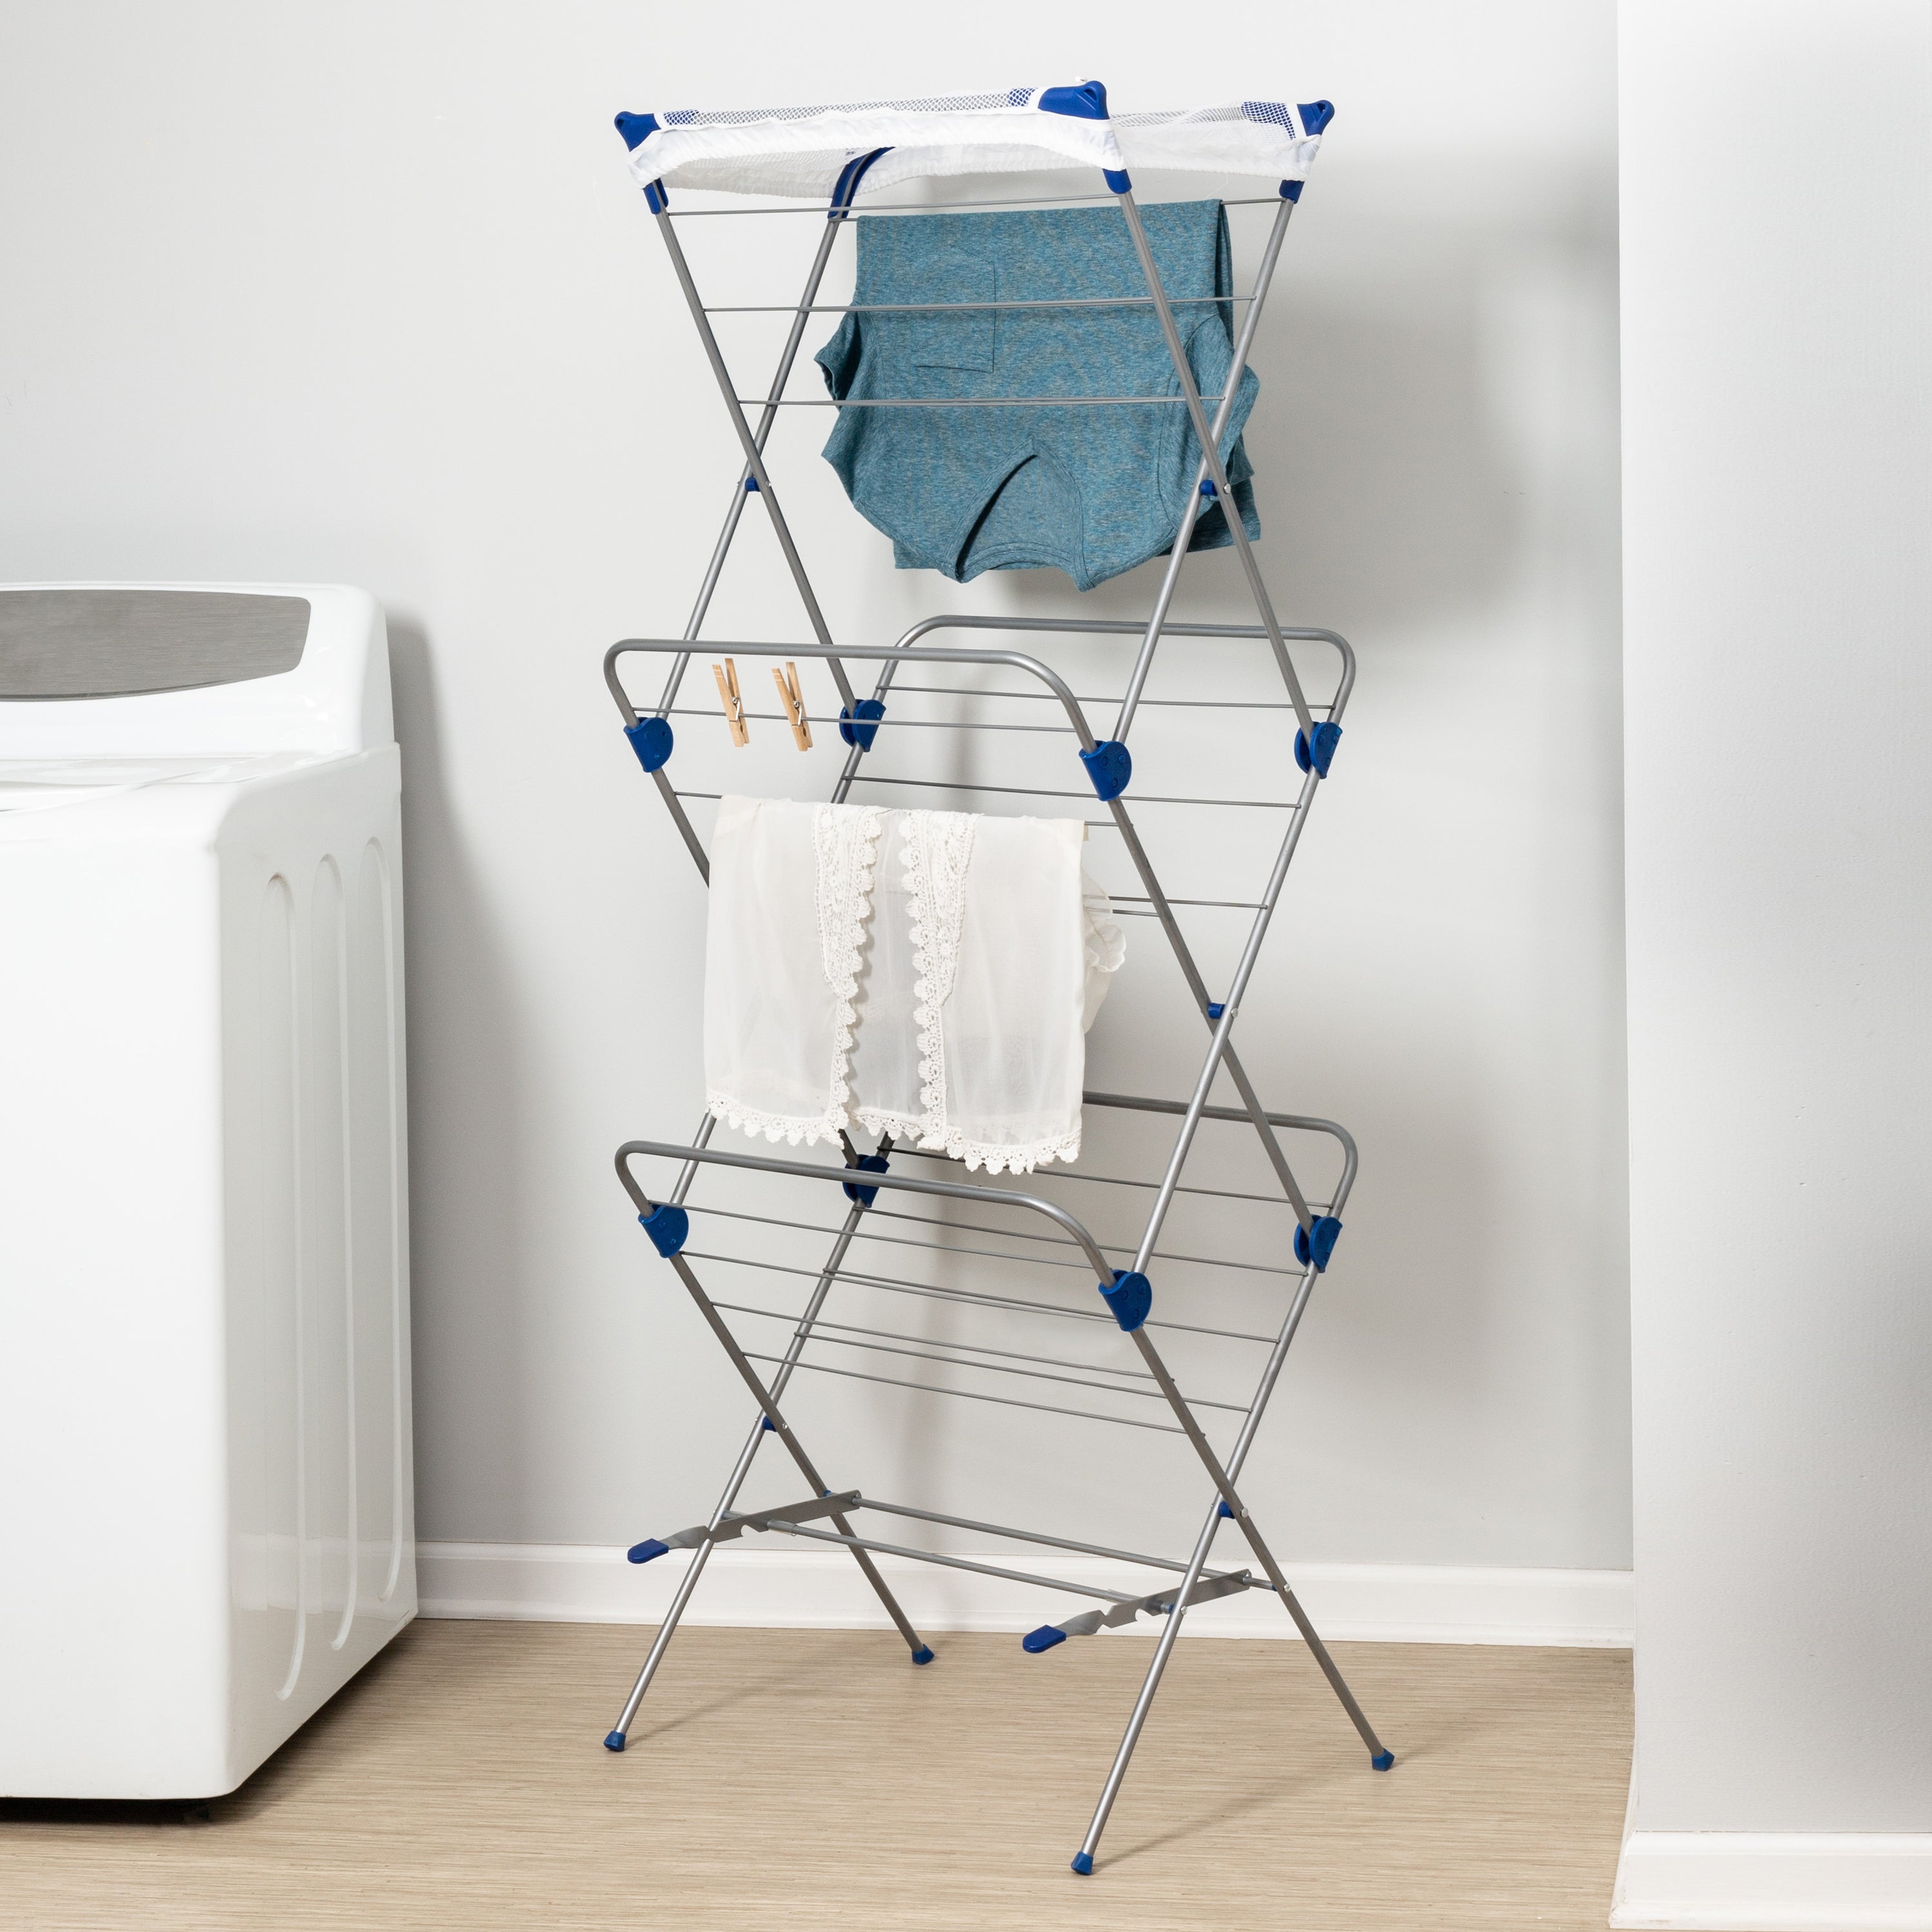 Laundry Clothes Drying Stand Storage 3 Layer Folding Dryer Hanger Rack  Organizer